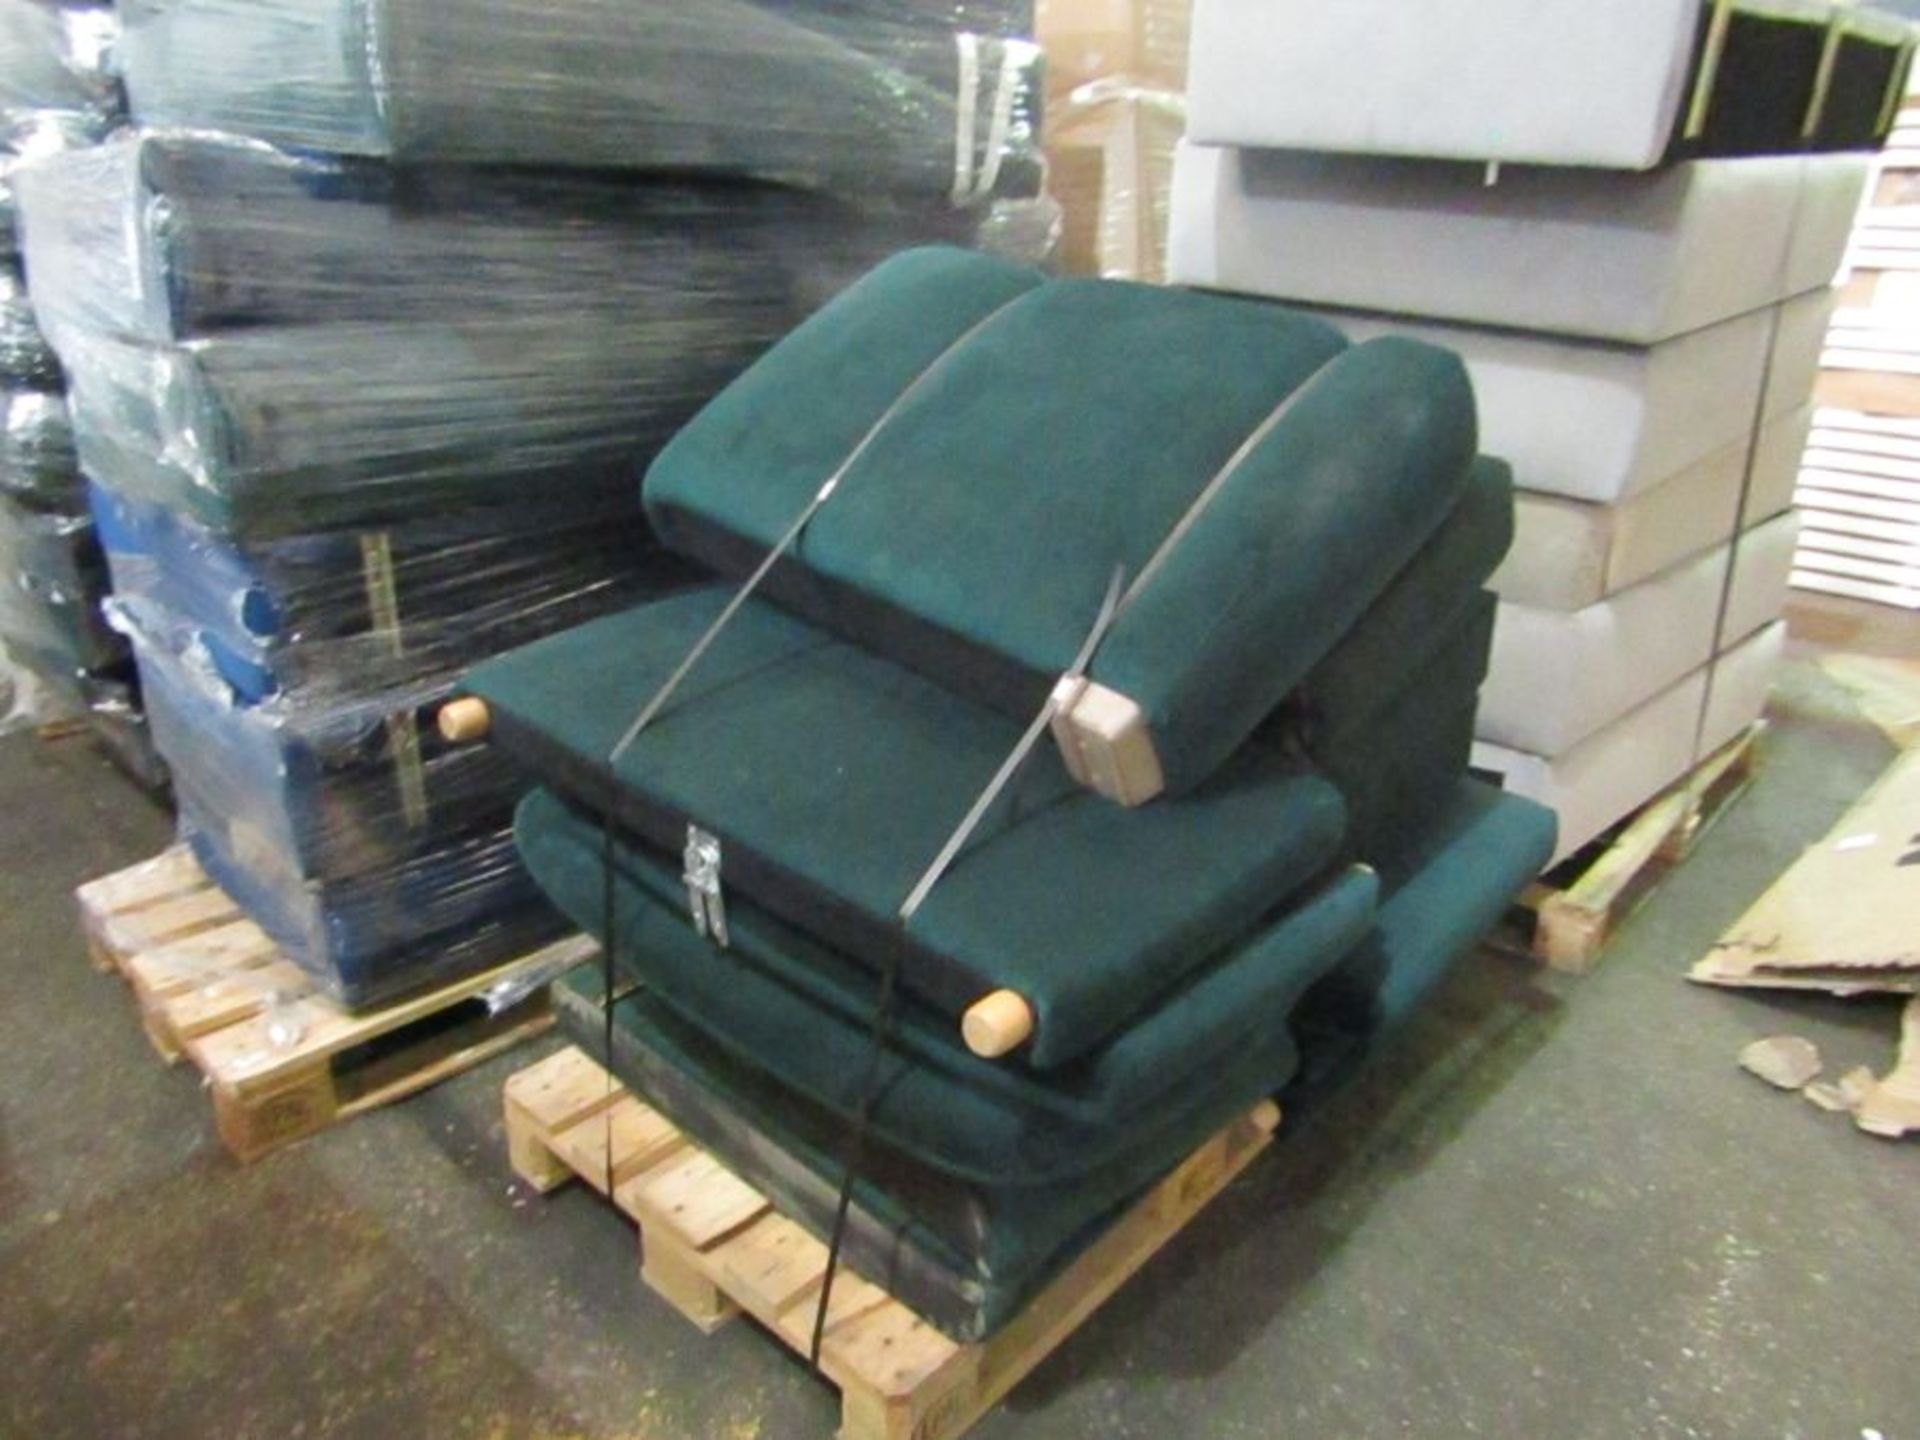 0% Buyers Premium, 24 Pallets of Genuine SNUG SOFA parts - Mixed Lots of Bases Backs Arms Cushions - Image 6 of 16